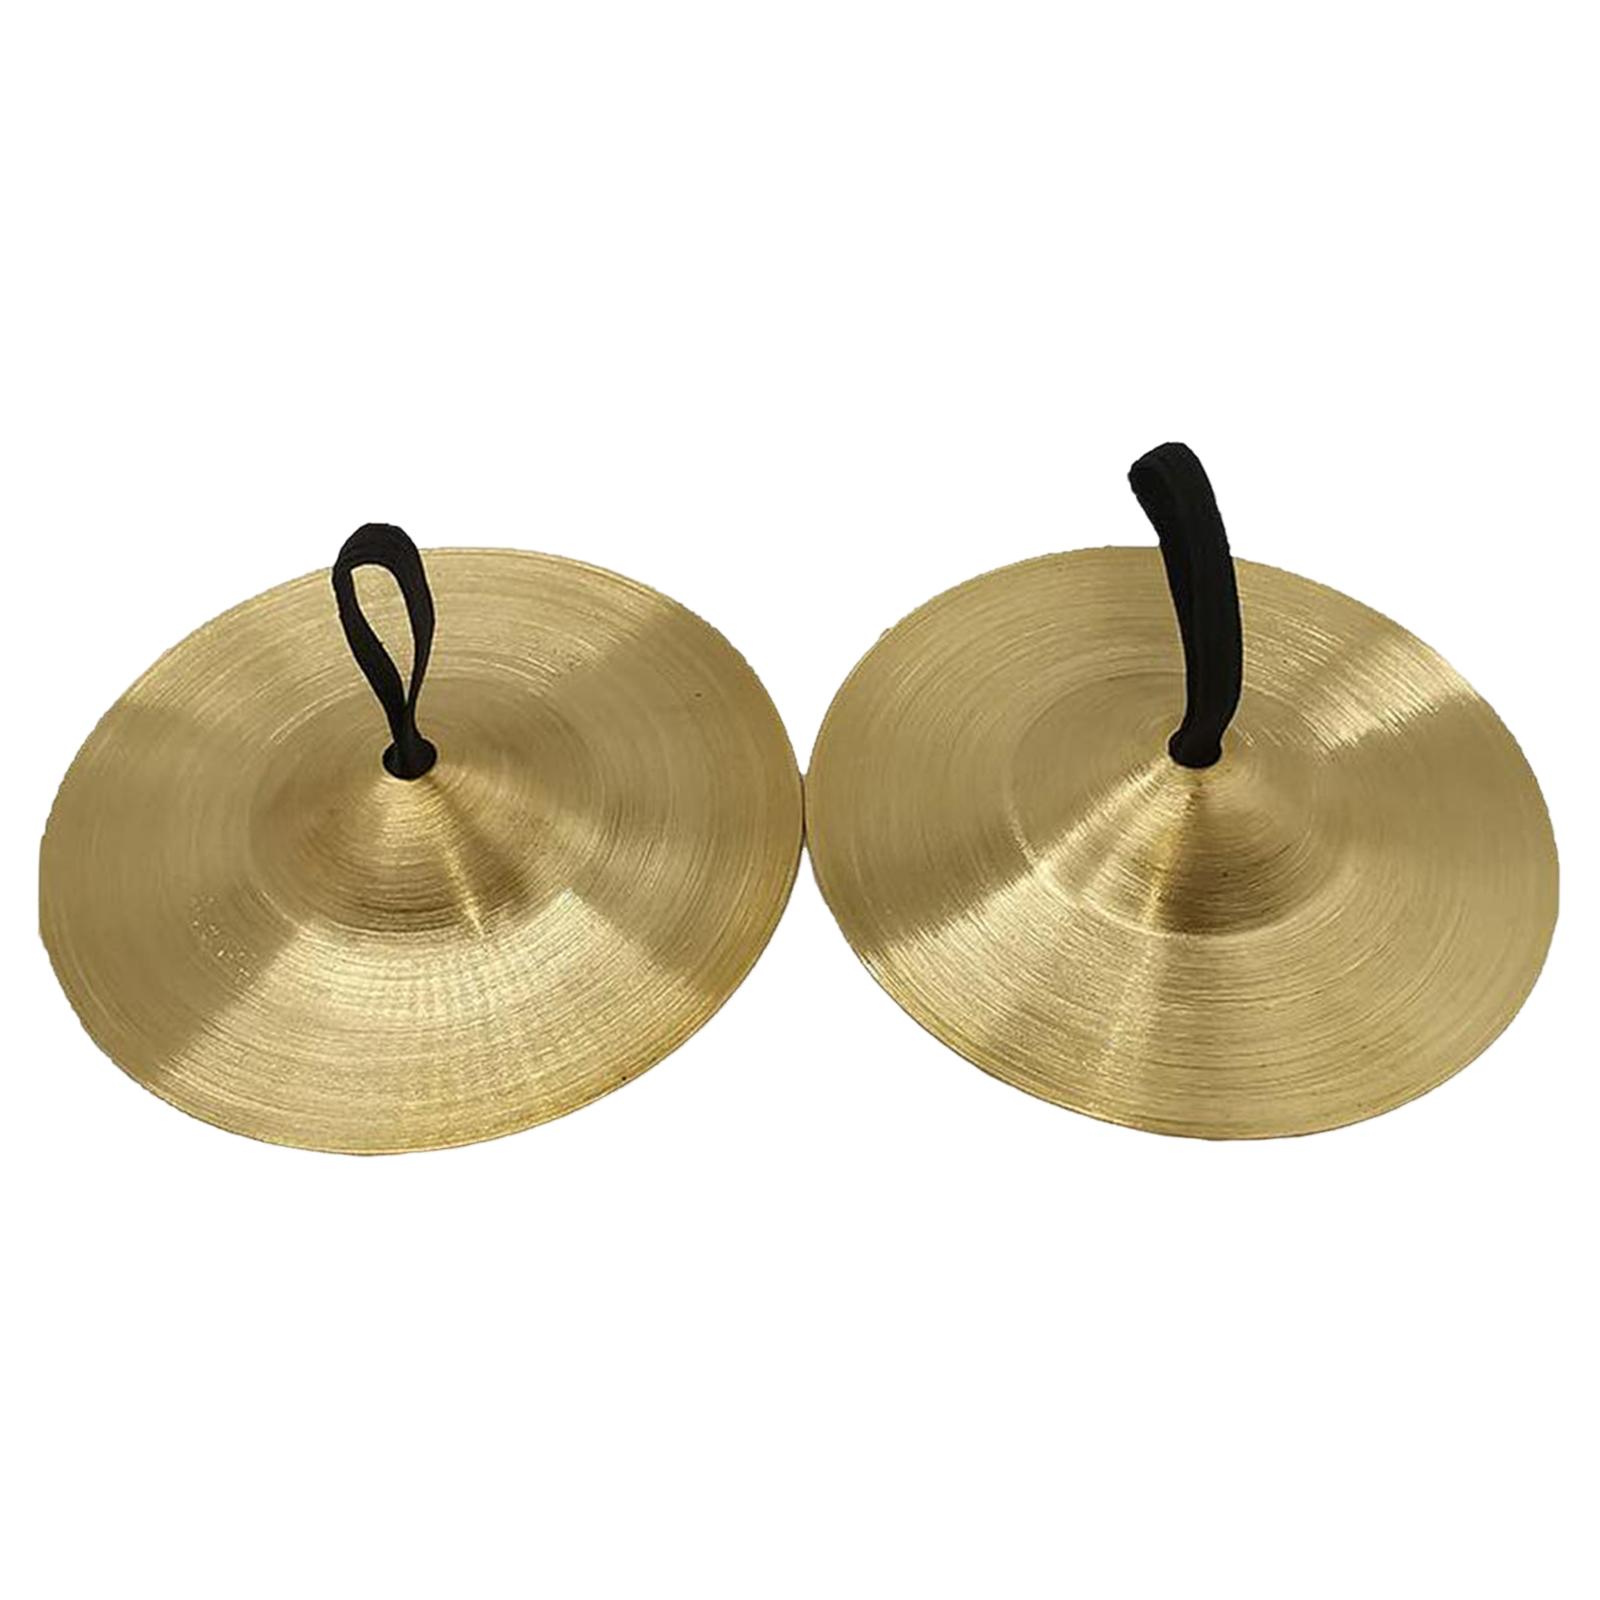 Hand Cymbals Kids Handheld Cymbals Musical Instrument copper Crash Cymbal for Kids ,Finger Cymbals for Activity, Events, Chorus, Presentations 9cm - image 4 of 8